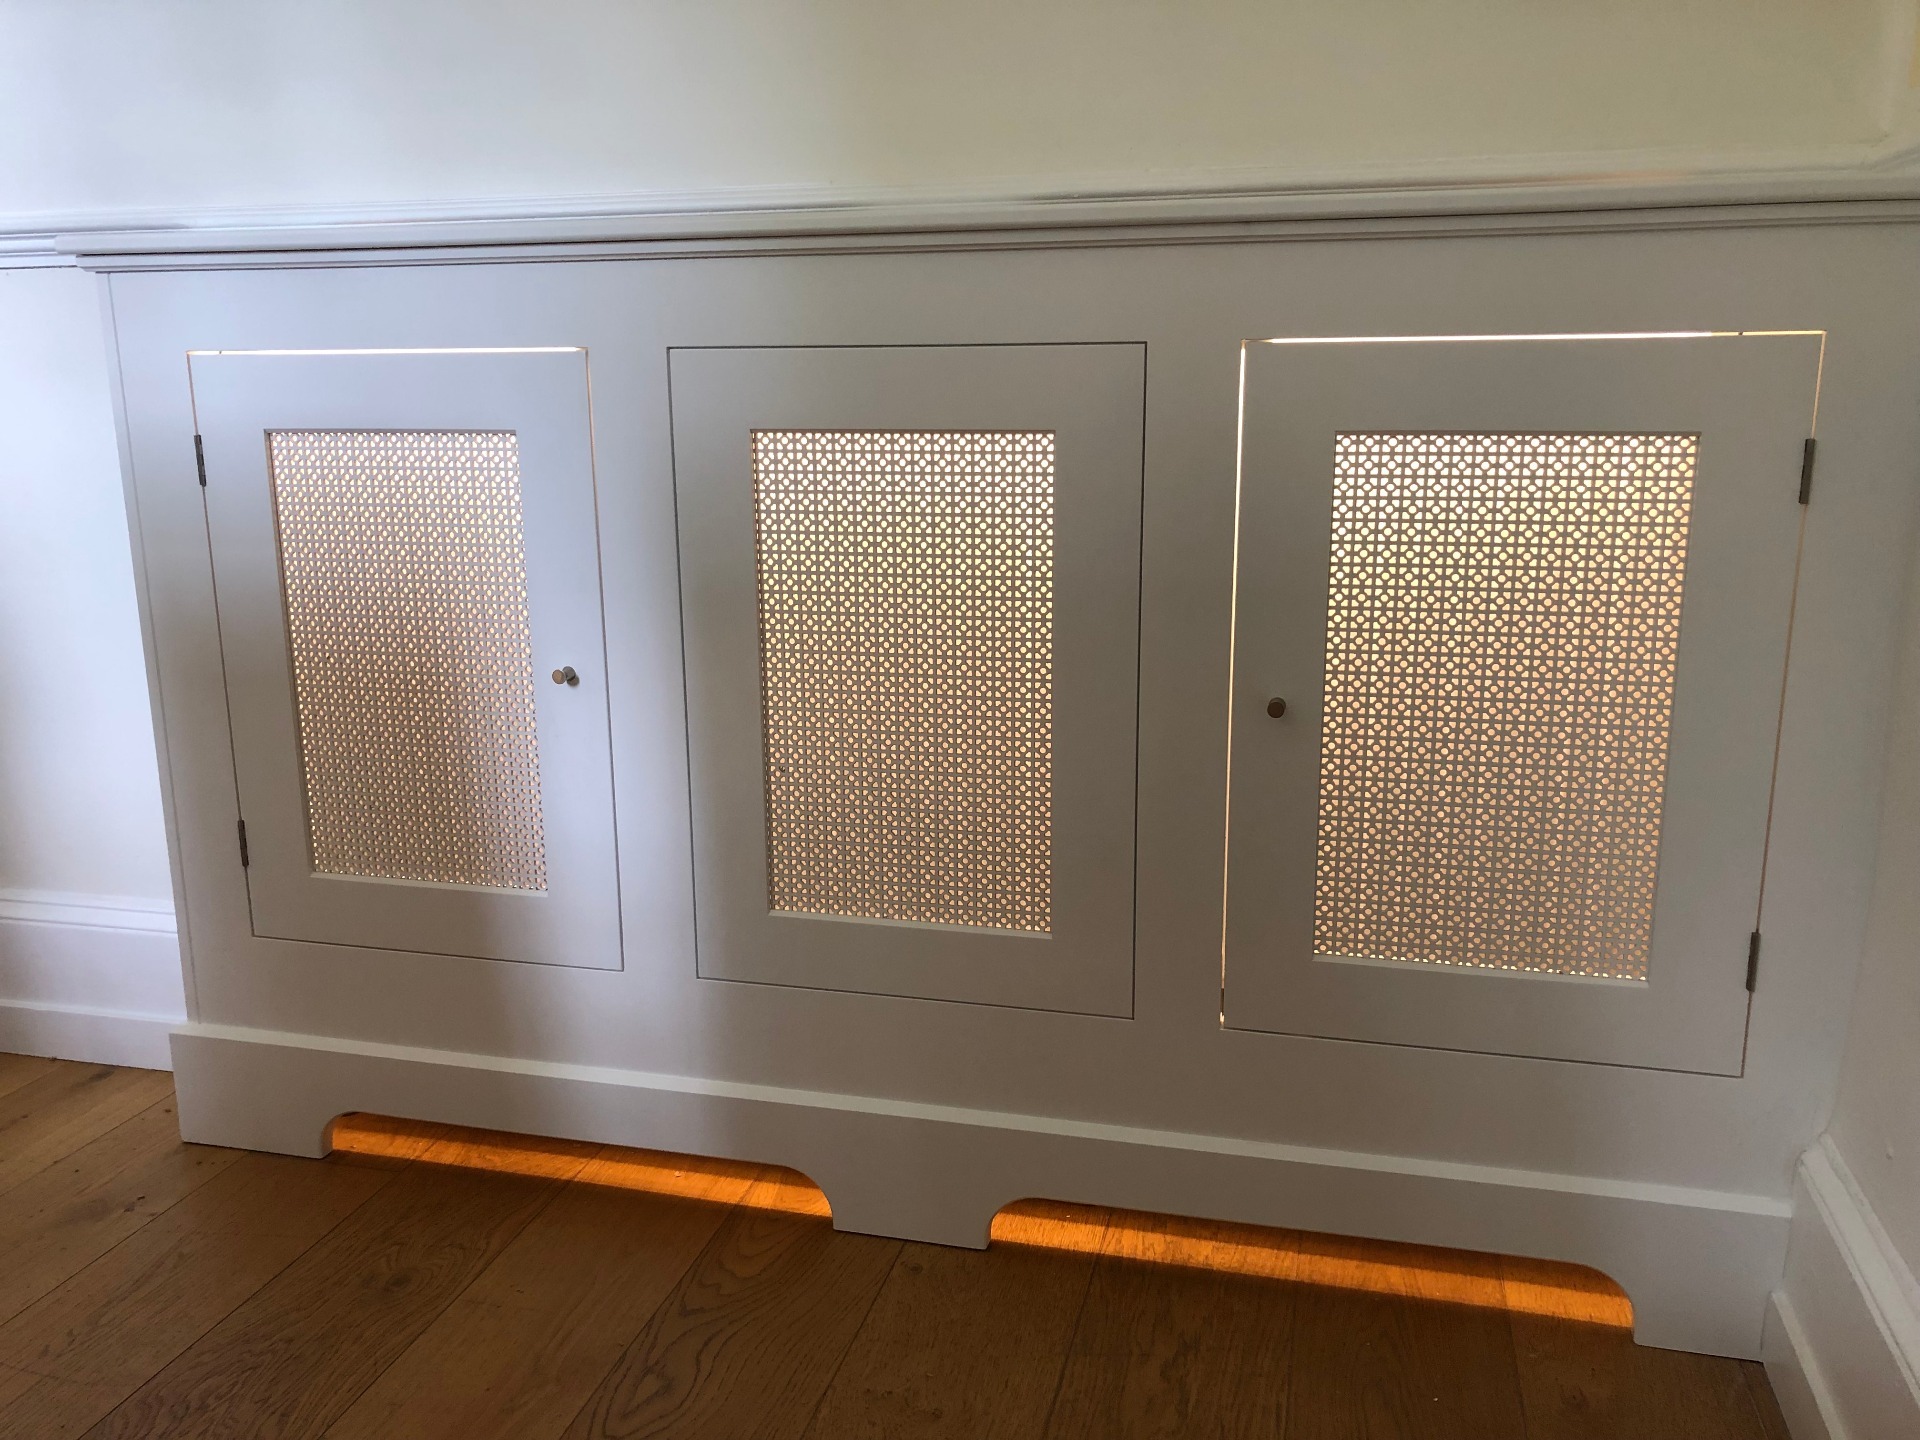 In-frame radiator cover with interior lighting